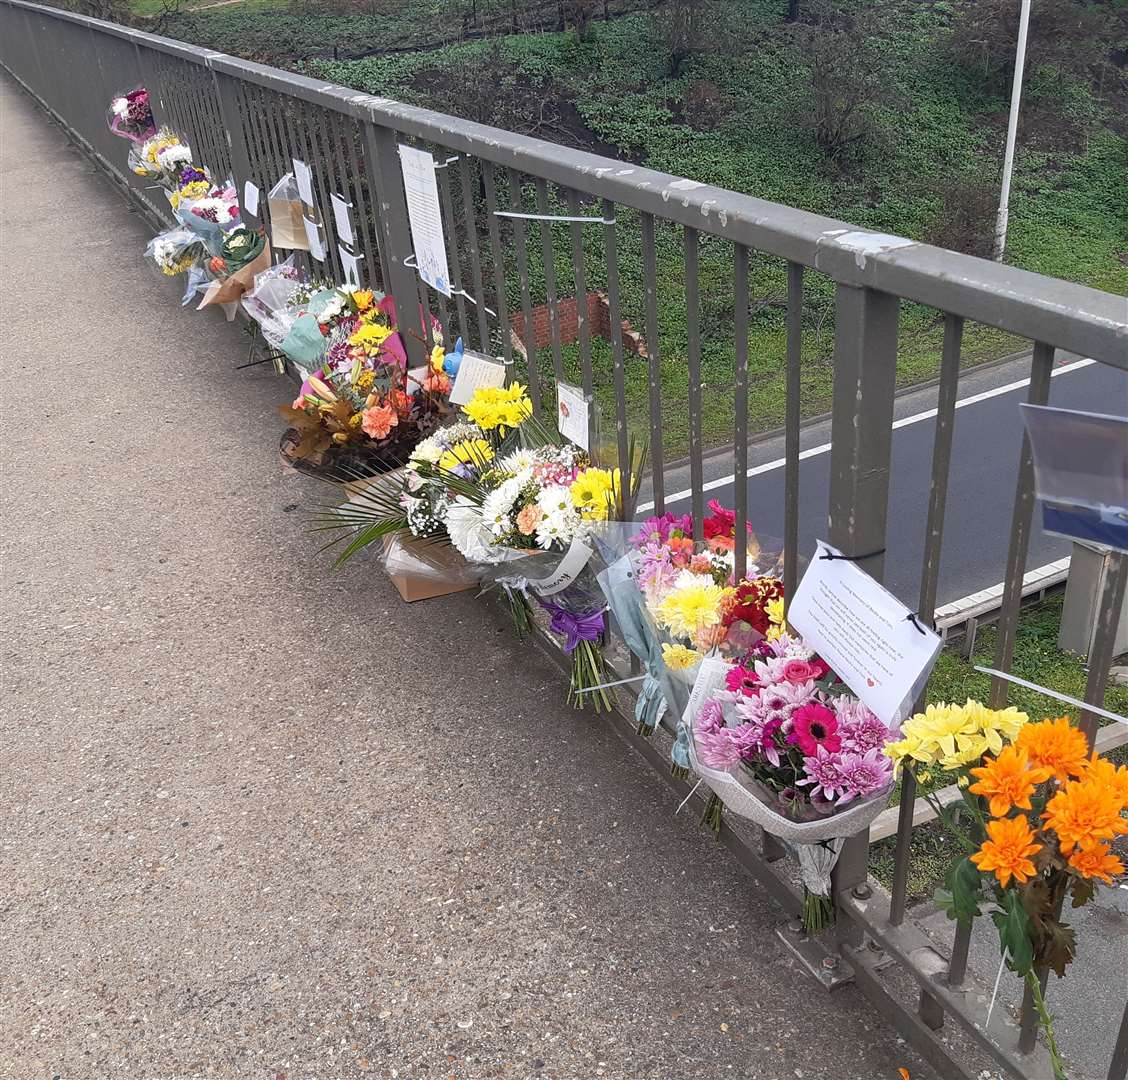 Floral tributes have been left at the scene of a fatal crash which killed two people on the A2 near Dartford Heath.